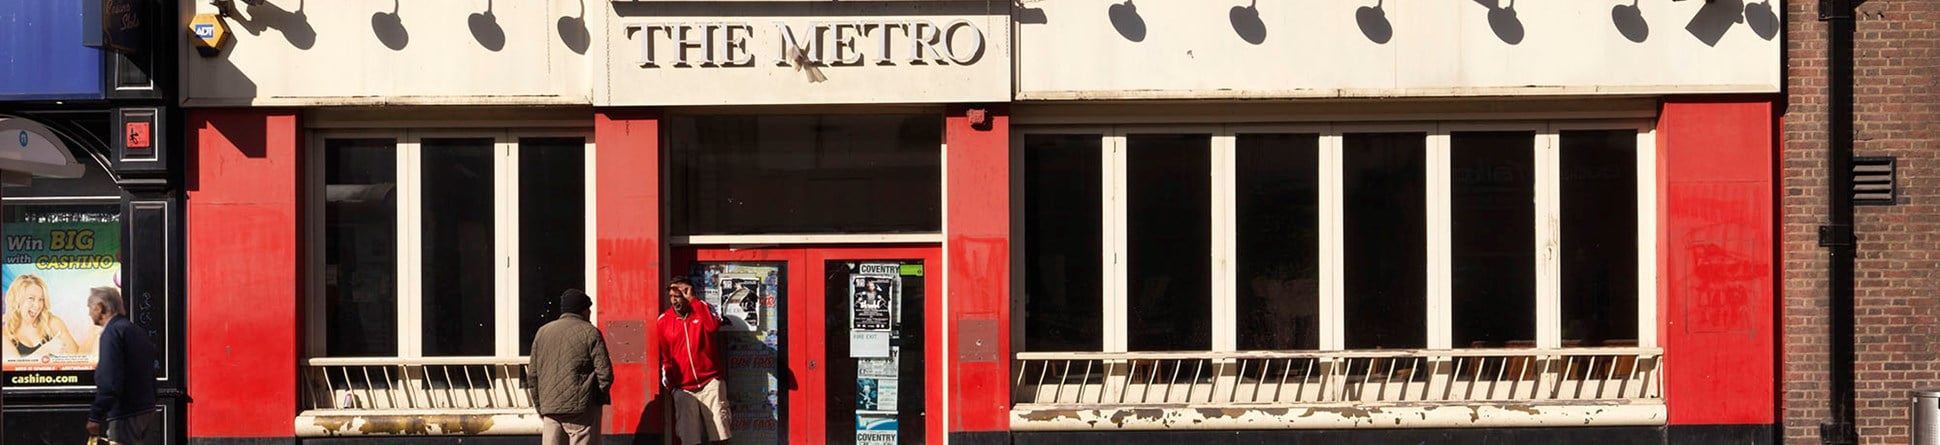 The Metro building and two pedestrians standing outside.